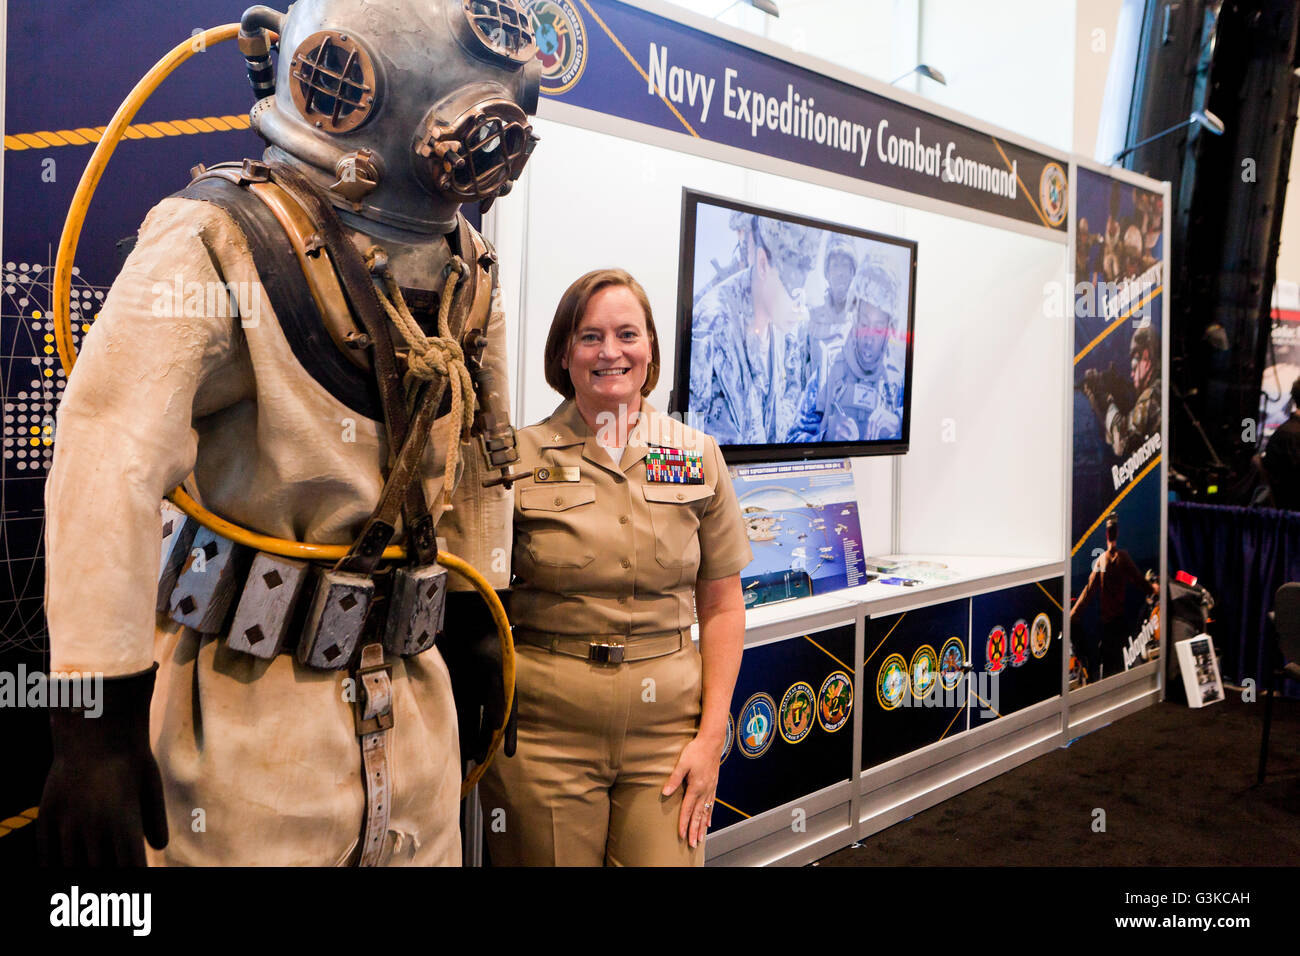 Navy Expeditionary Combat Command exhibit booth at US Navy League Sea